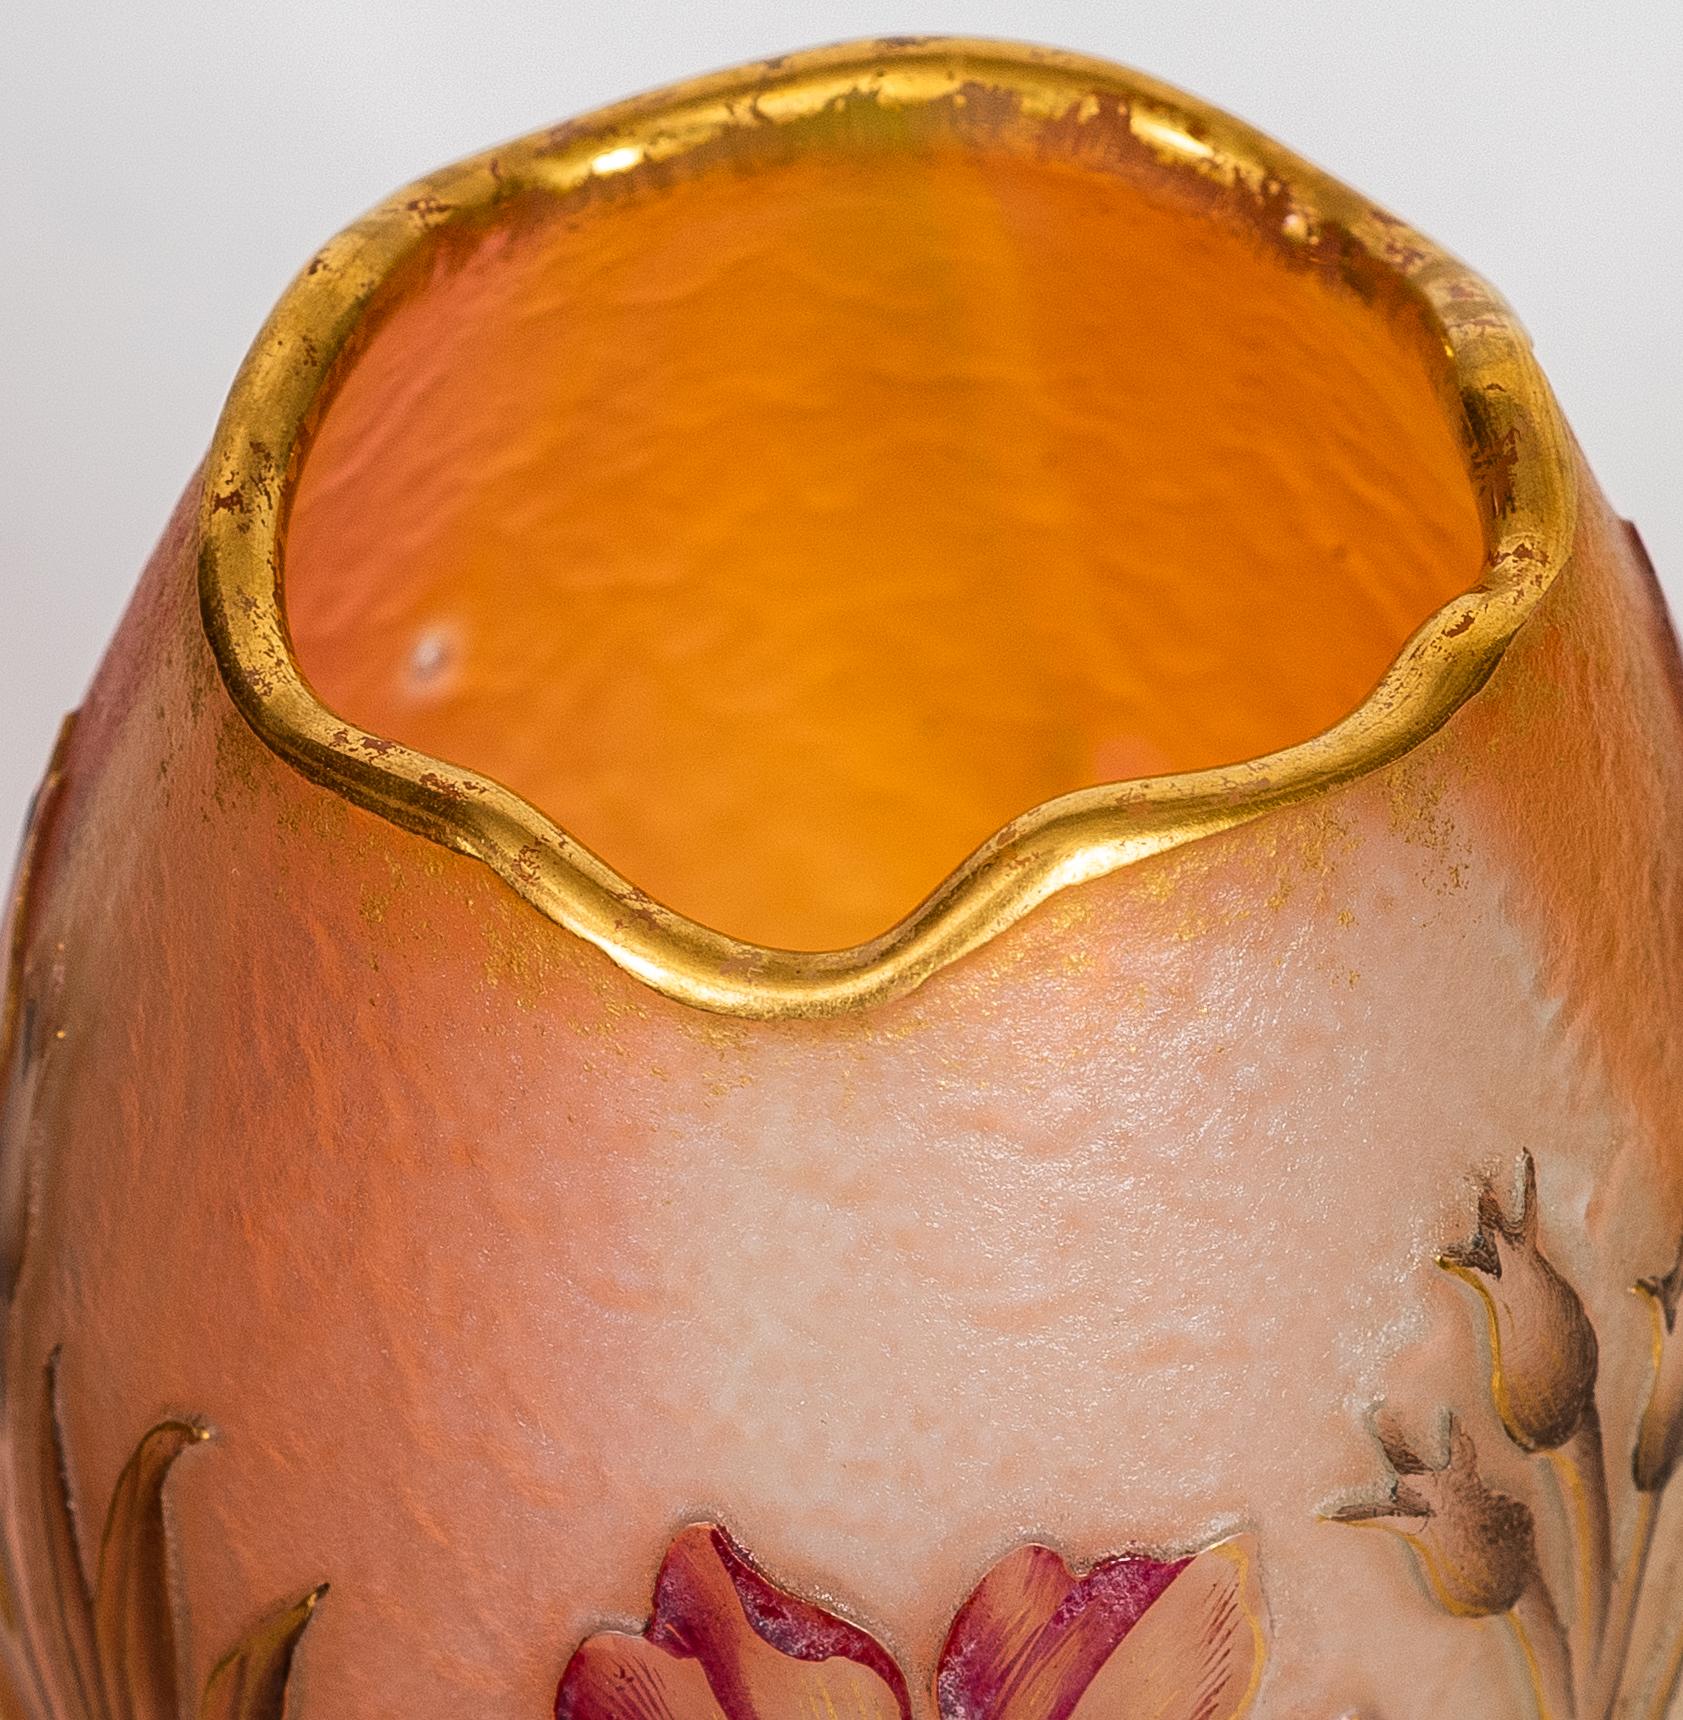 Daum Nancy Cameo and enamel glass vase,
France, circa 1910
decorated with red and pink flowers on a light opalescent ground
signed in gilt Daum Nancy with Lorraine cross
Dimensions:
Height 3 1/2 in. (8.89 cm.)
Diameter 2 1/4 in. (5.71 cm.)